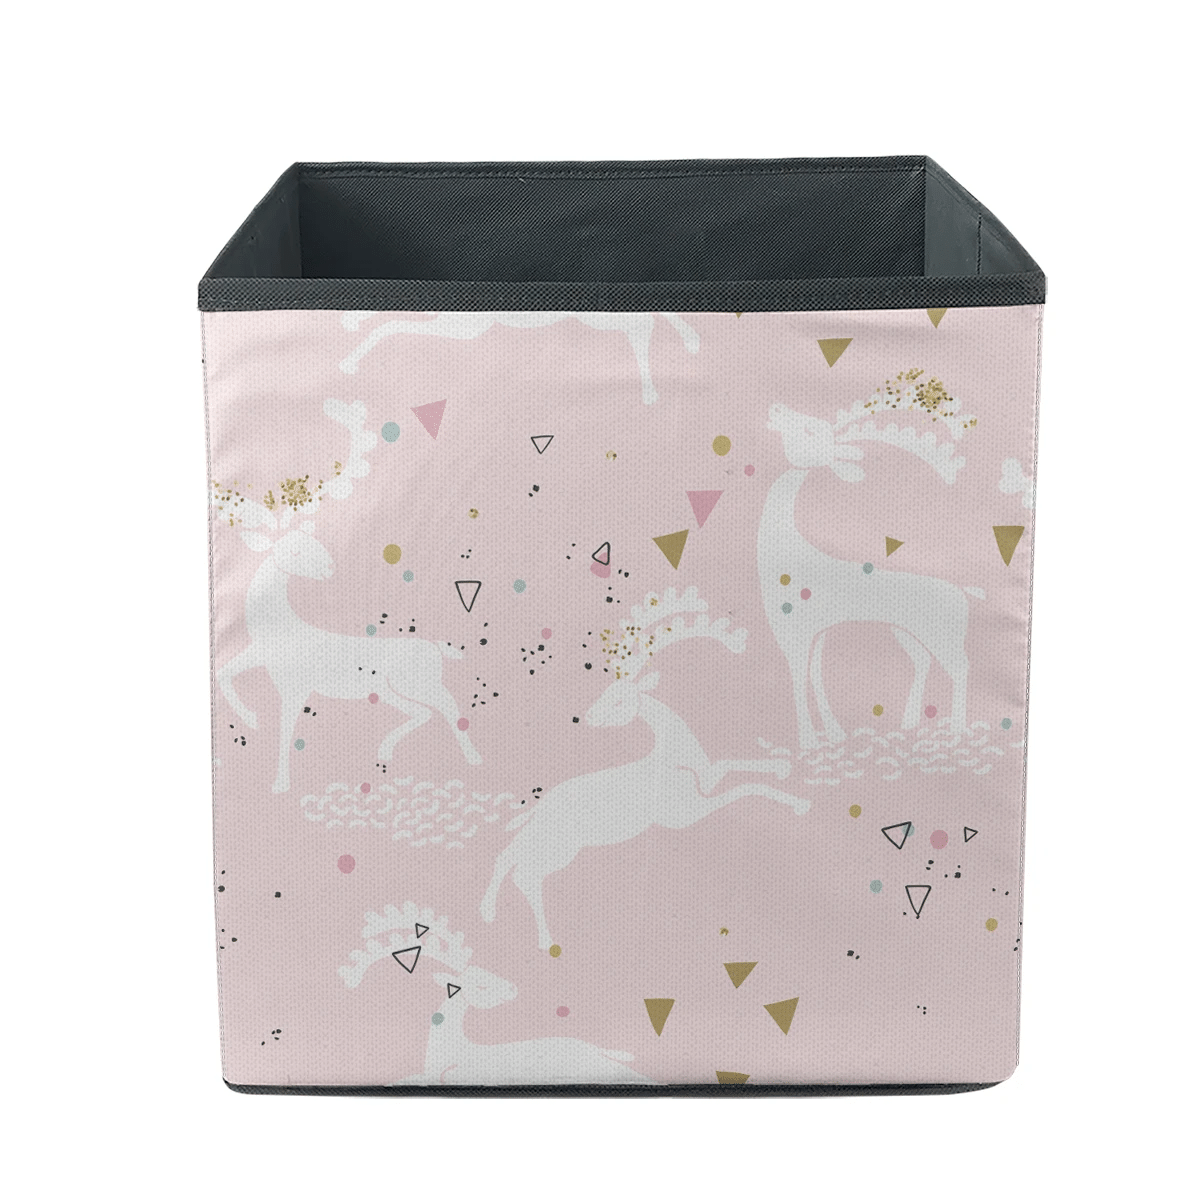 Christmas Winter With White Deers On Pink Storage Bin Storage Cube